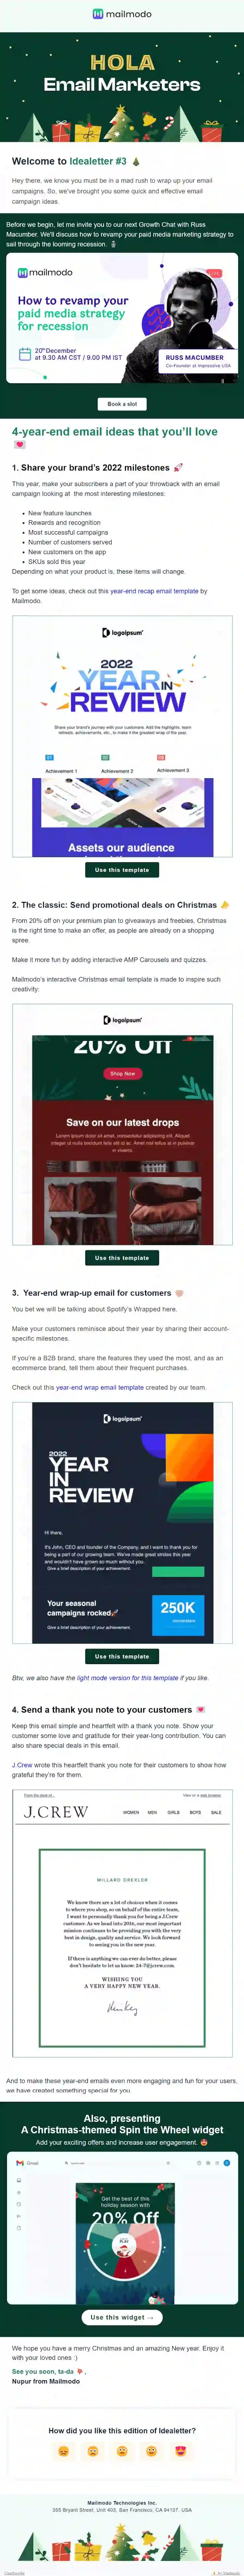 Free Christmas Email Newsletter Template